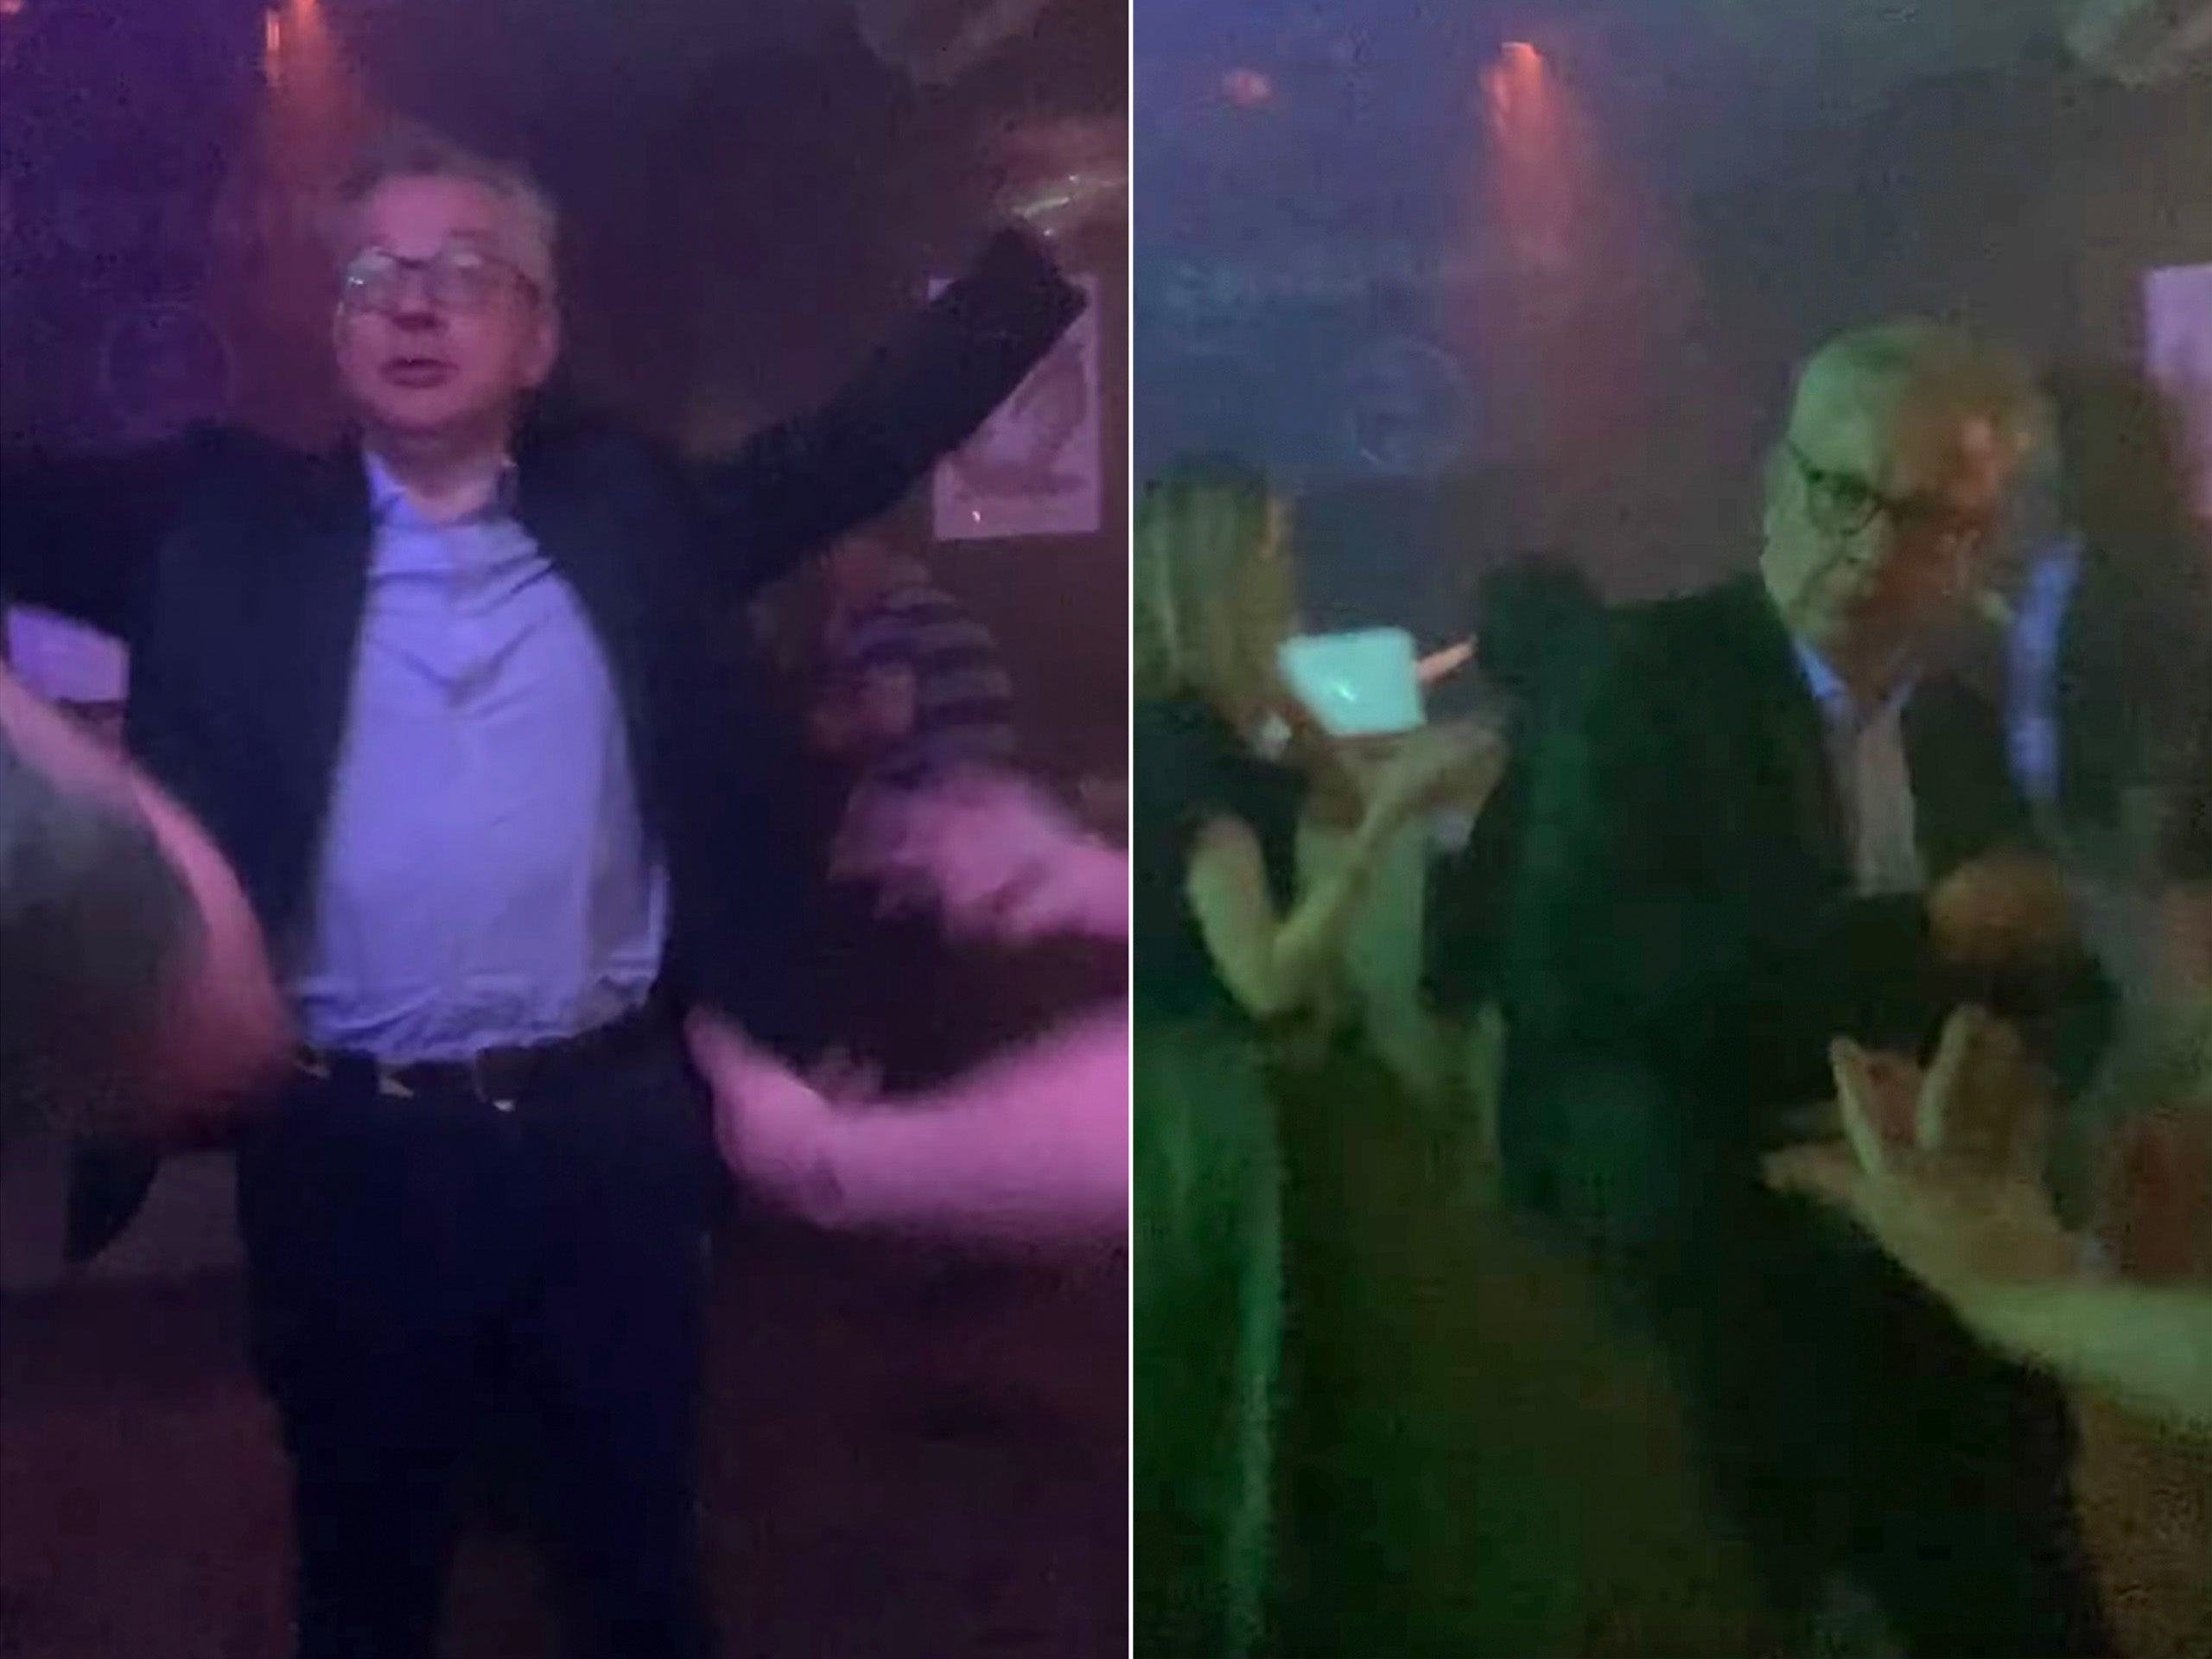 Michael Gove was spotted at Pipe, a nightclub in Aberdeen